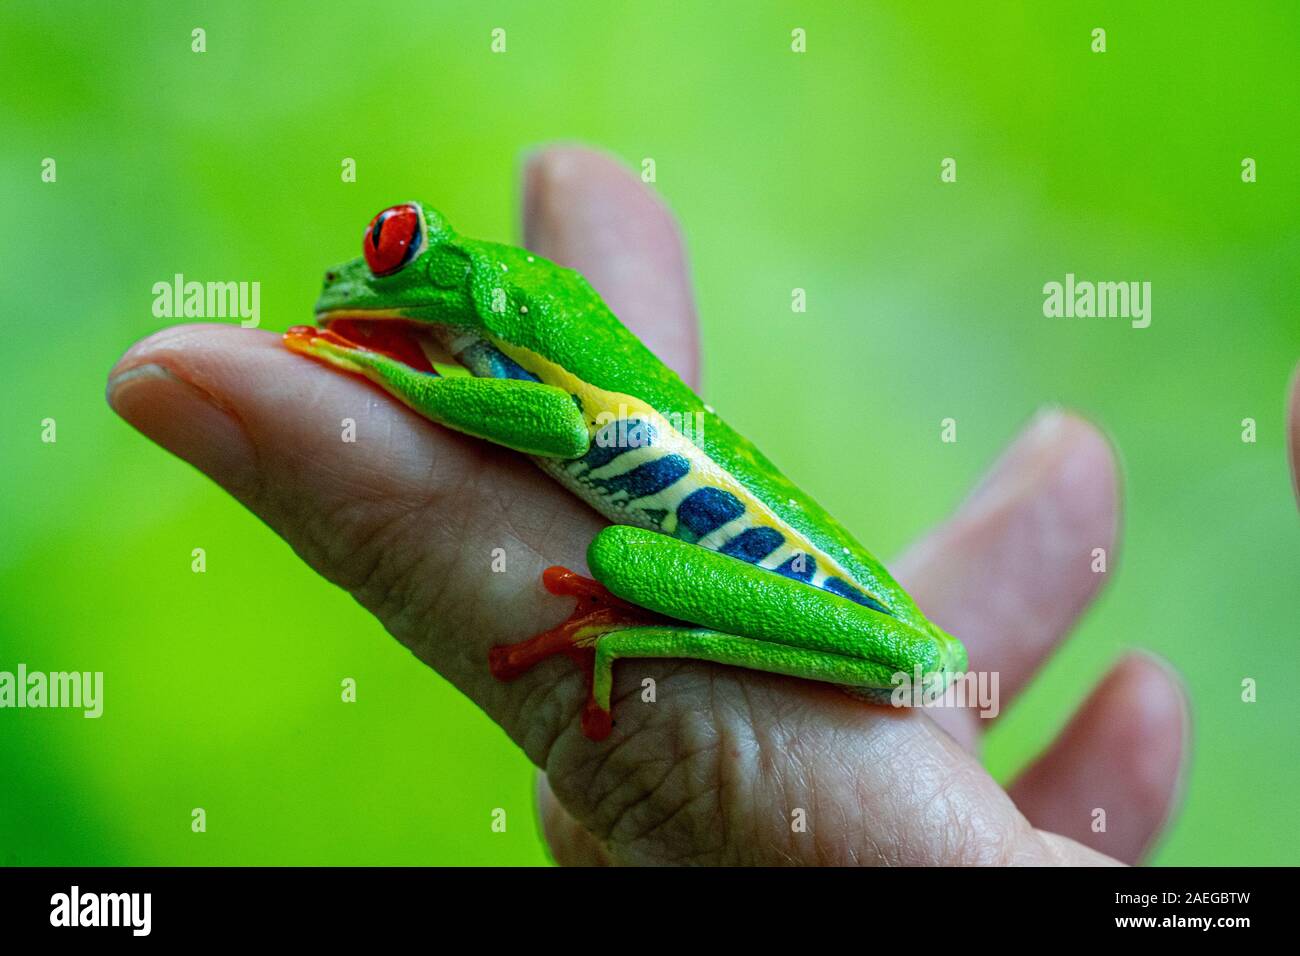 Woman holds a Red-eyed Treefrog (Agalychnis callidryas) on the palm of her hand in Costa Rica rainforest. This frog is found in the tropical rainfores Stock Photo